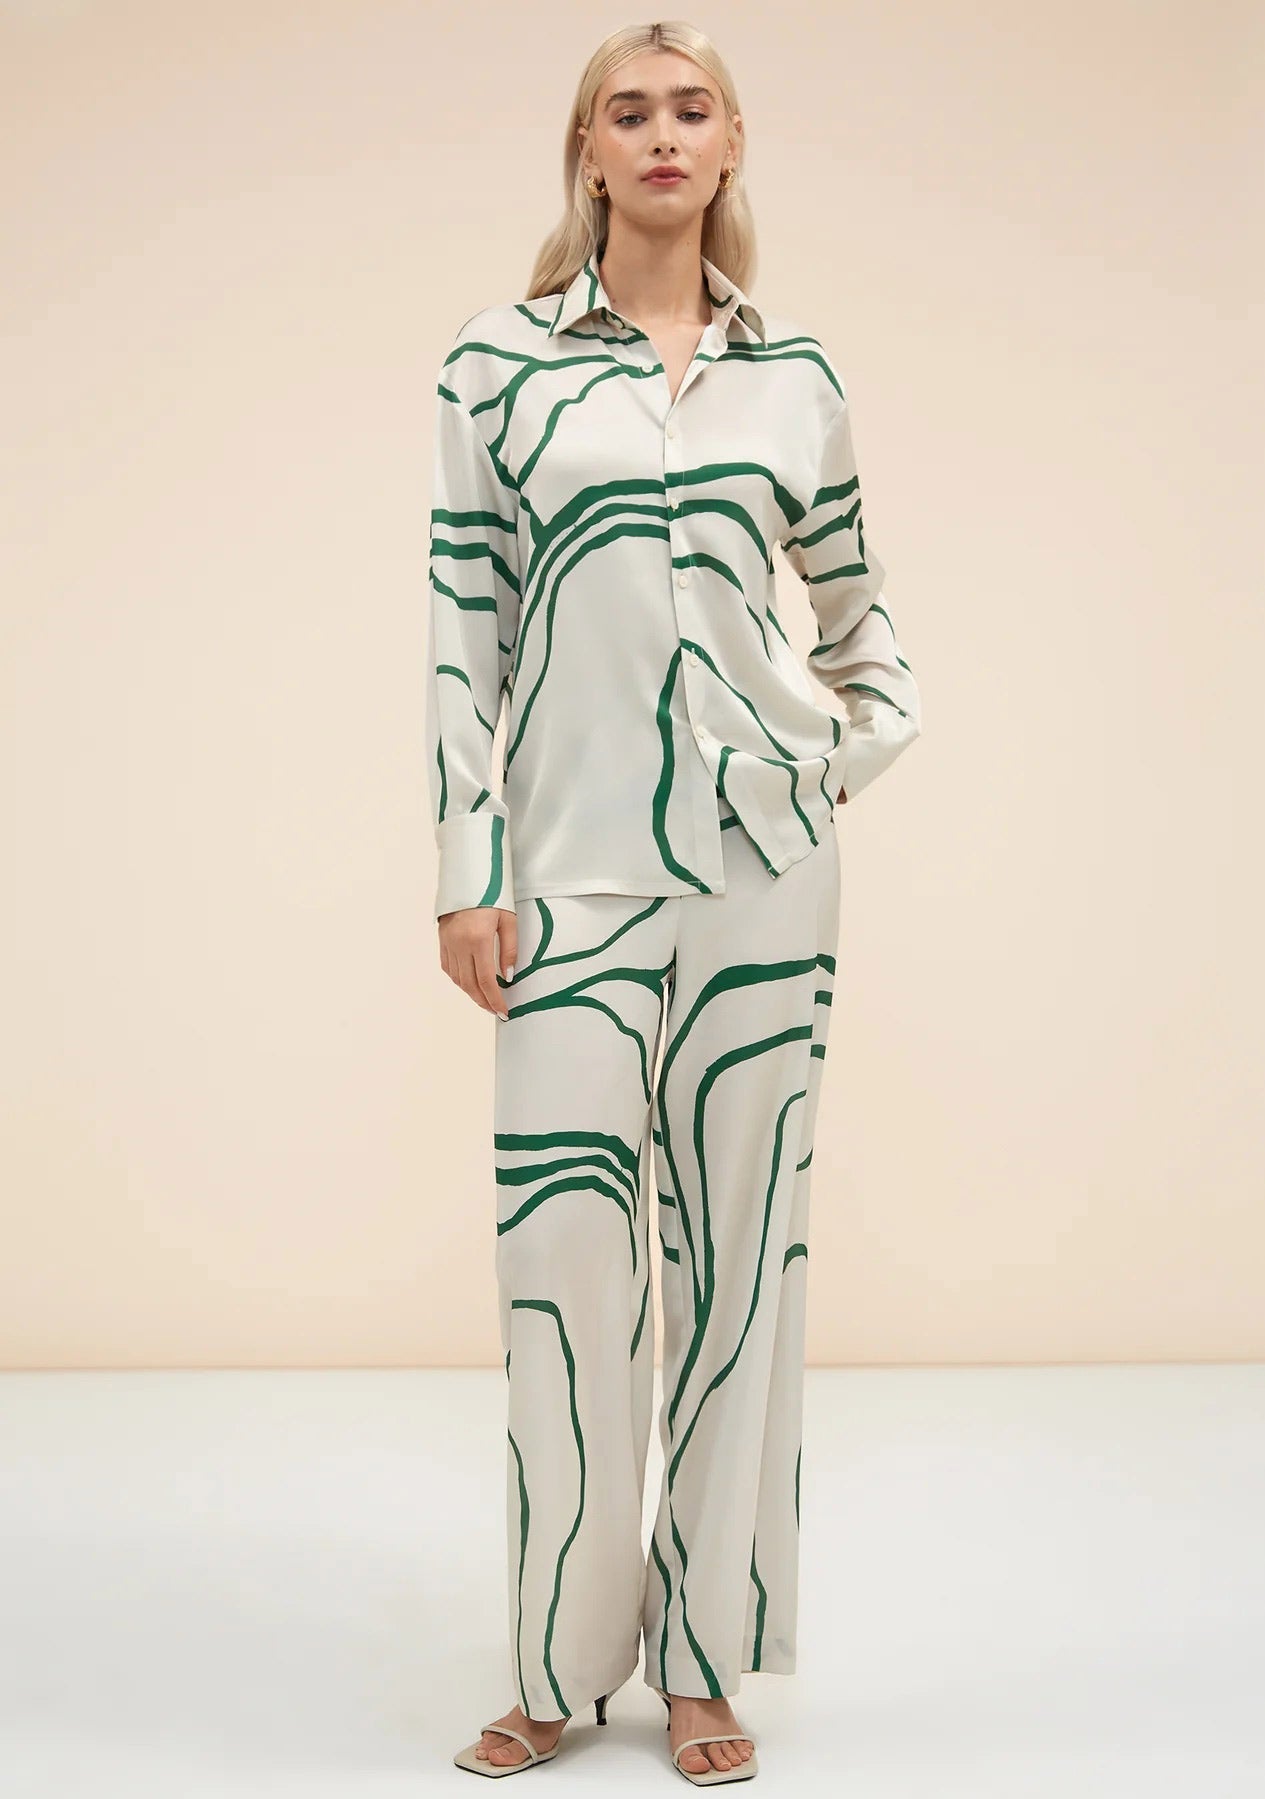 Green abstract pattern co-ord set with wide leg pants and button up shirt fashionable womenswear 